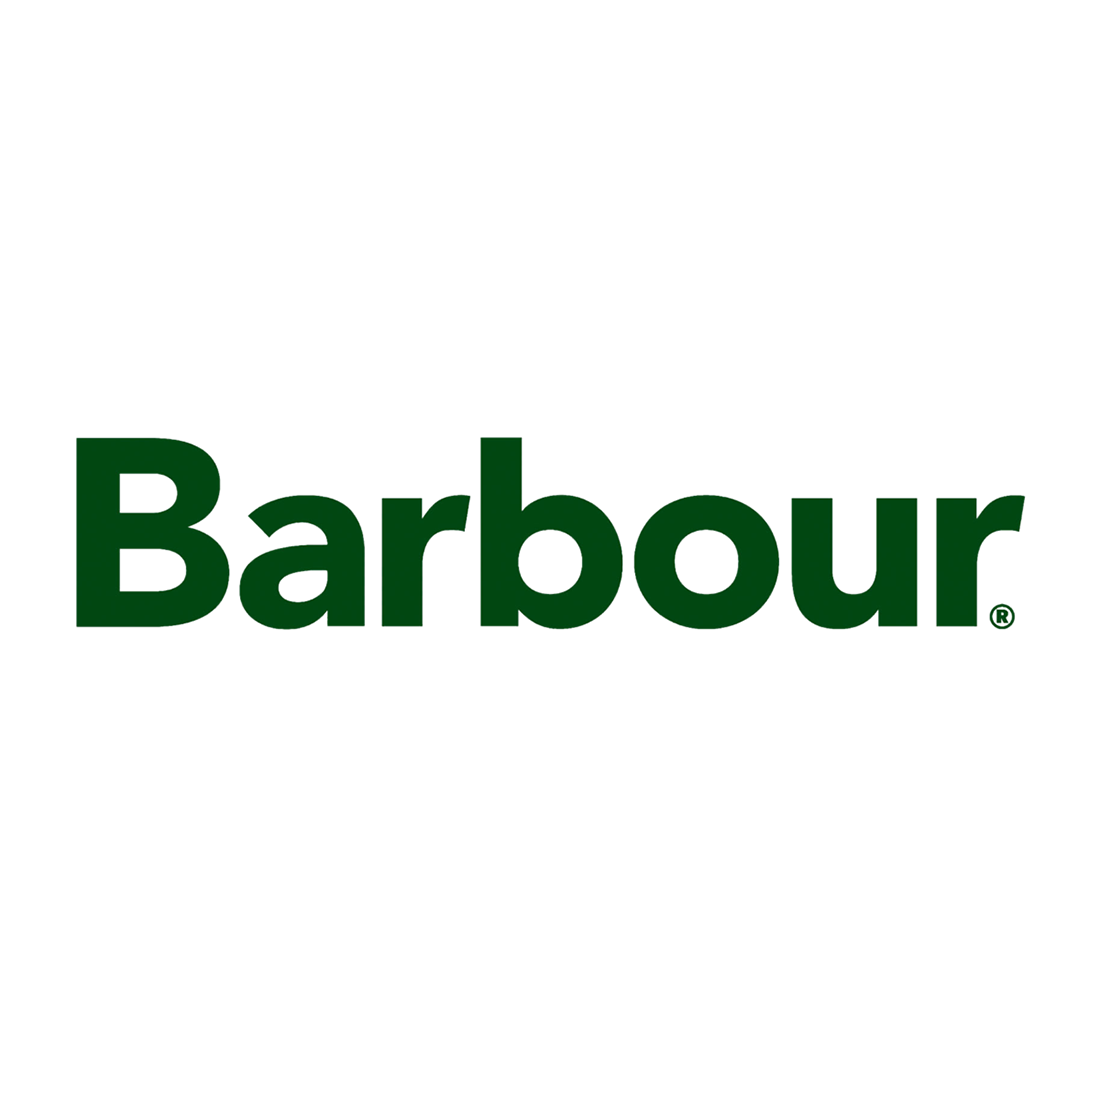 Barbour brand logo, link to Barbour products page